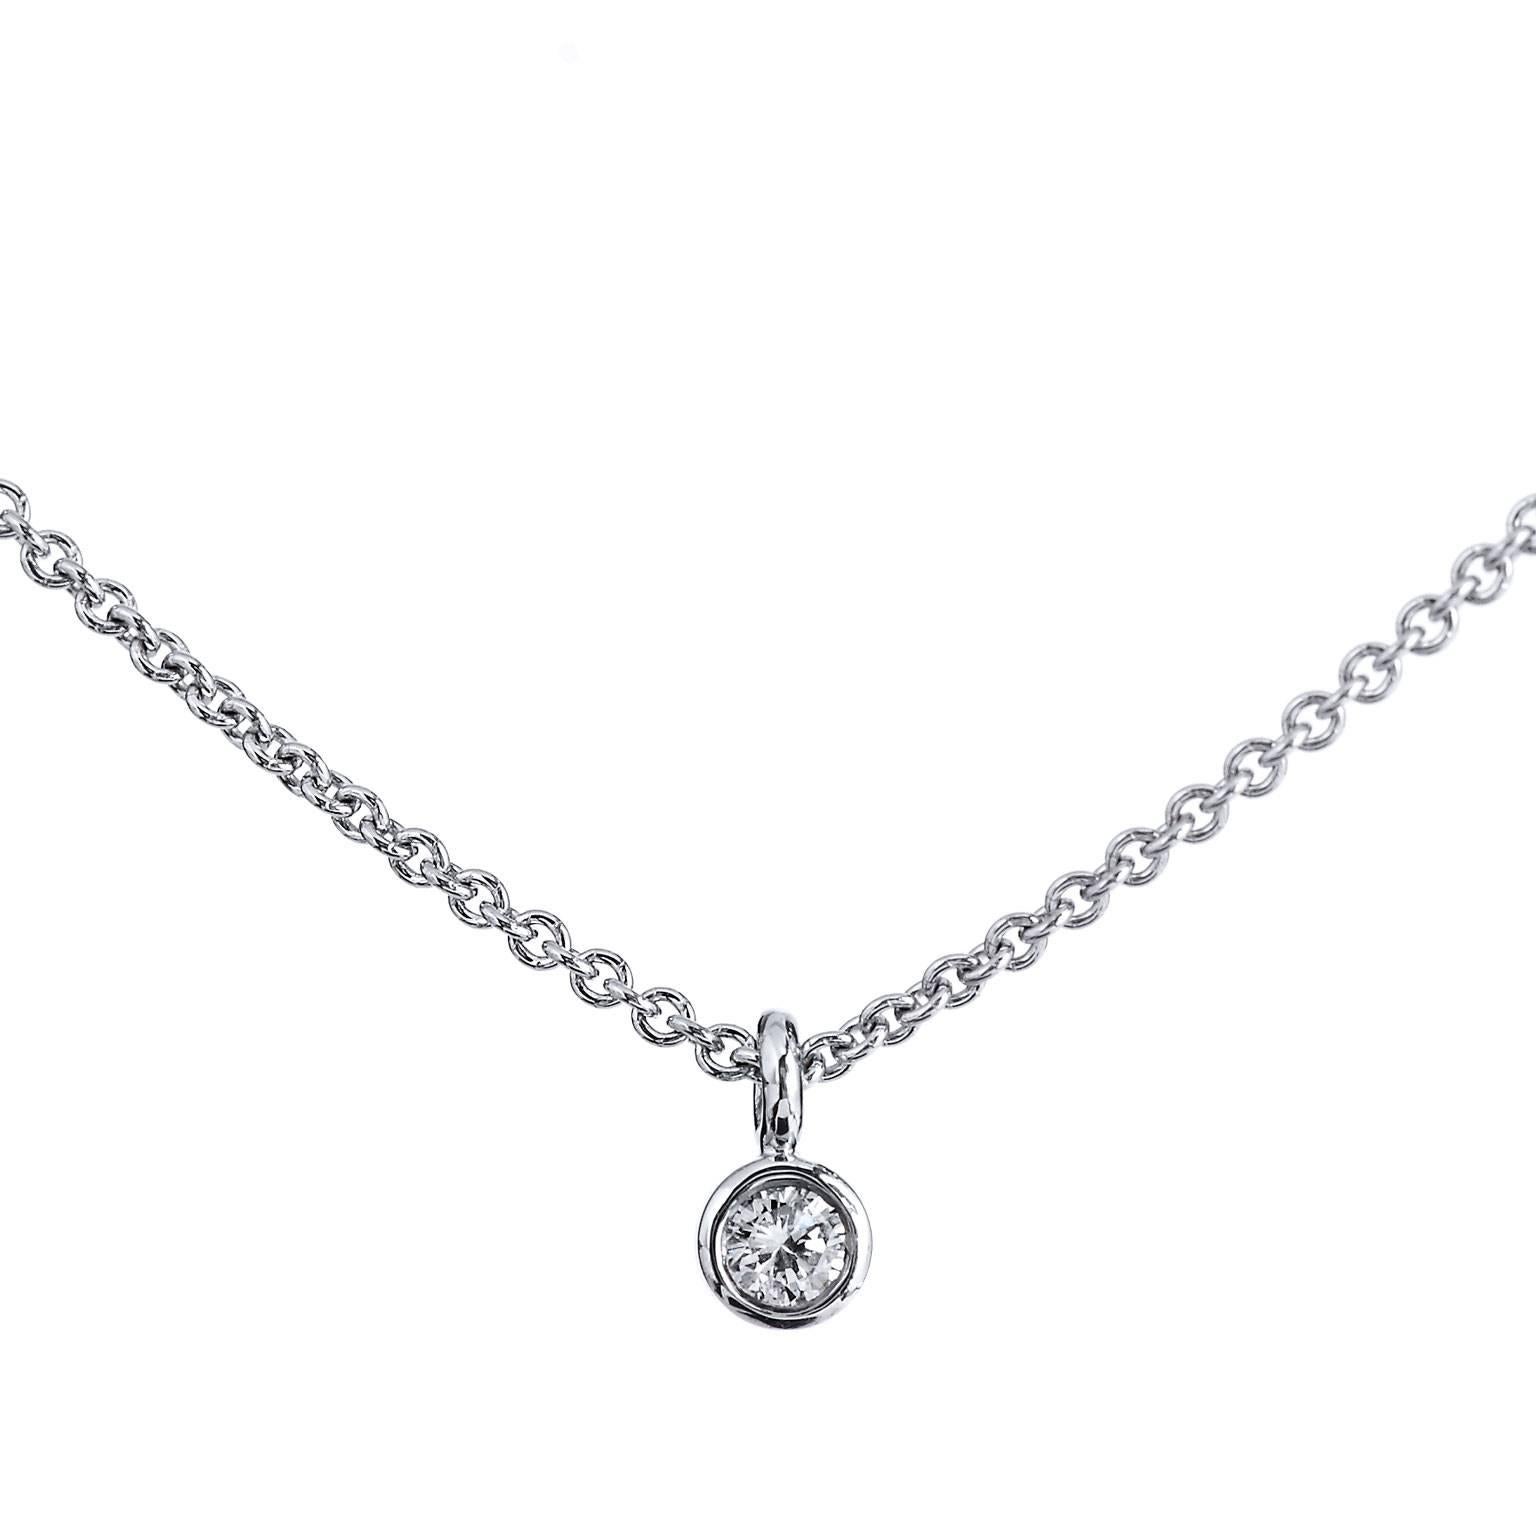 H & H Minimal 0.05 Carat Diamond Solitaire Pendant Necklace

This H and H 18 karat white gold pendant features a lovely 0.05 carat round brilliant cut diamond at center bezel set (H/I). Simplicity and refinement reign supreme in this piece.  The